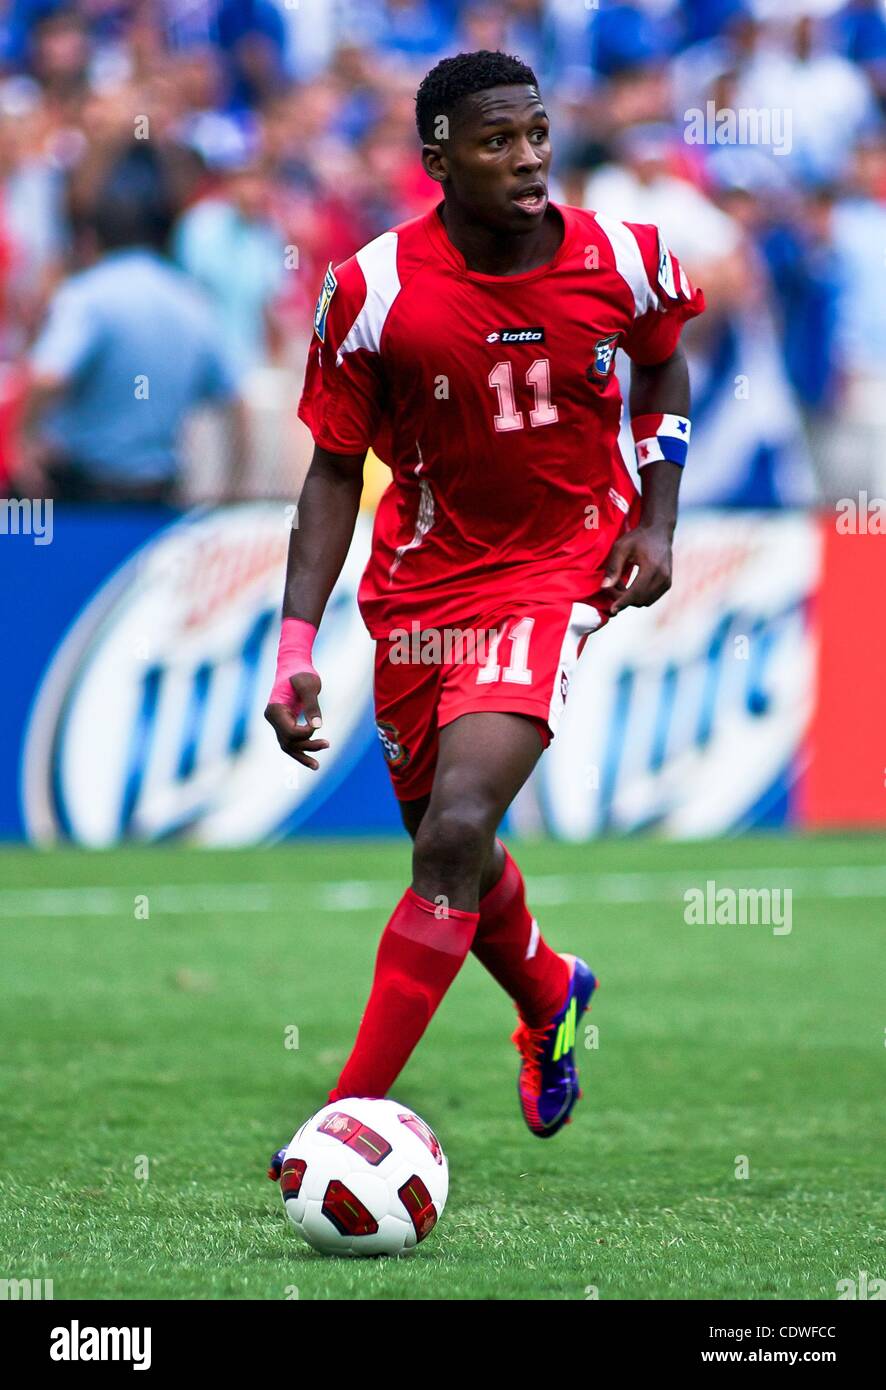 June 16, 2011 - Washington, District of Columbia, United States of America - Panama Midfielder Armando Cooper #11 in the midst of the concacaf gold cup quarterfinals Sunday, June 19, 2011 at RFK Stadium in Washington DC. (Credit Image: © Saquan Stimpson/Southcreek Global/ZUMAPRESS.com) Stock Photo